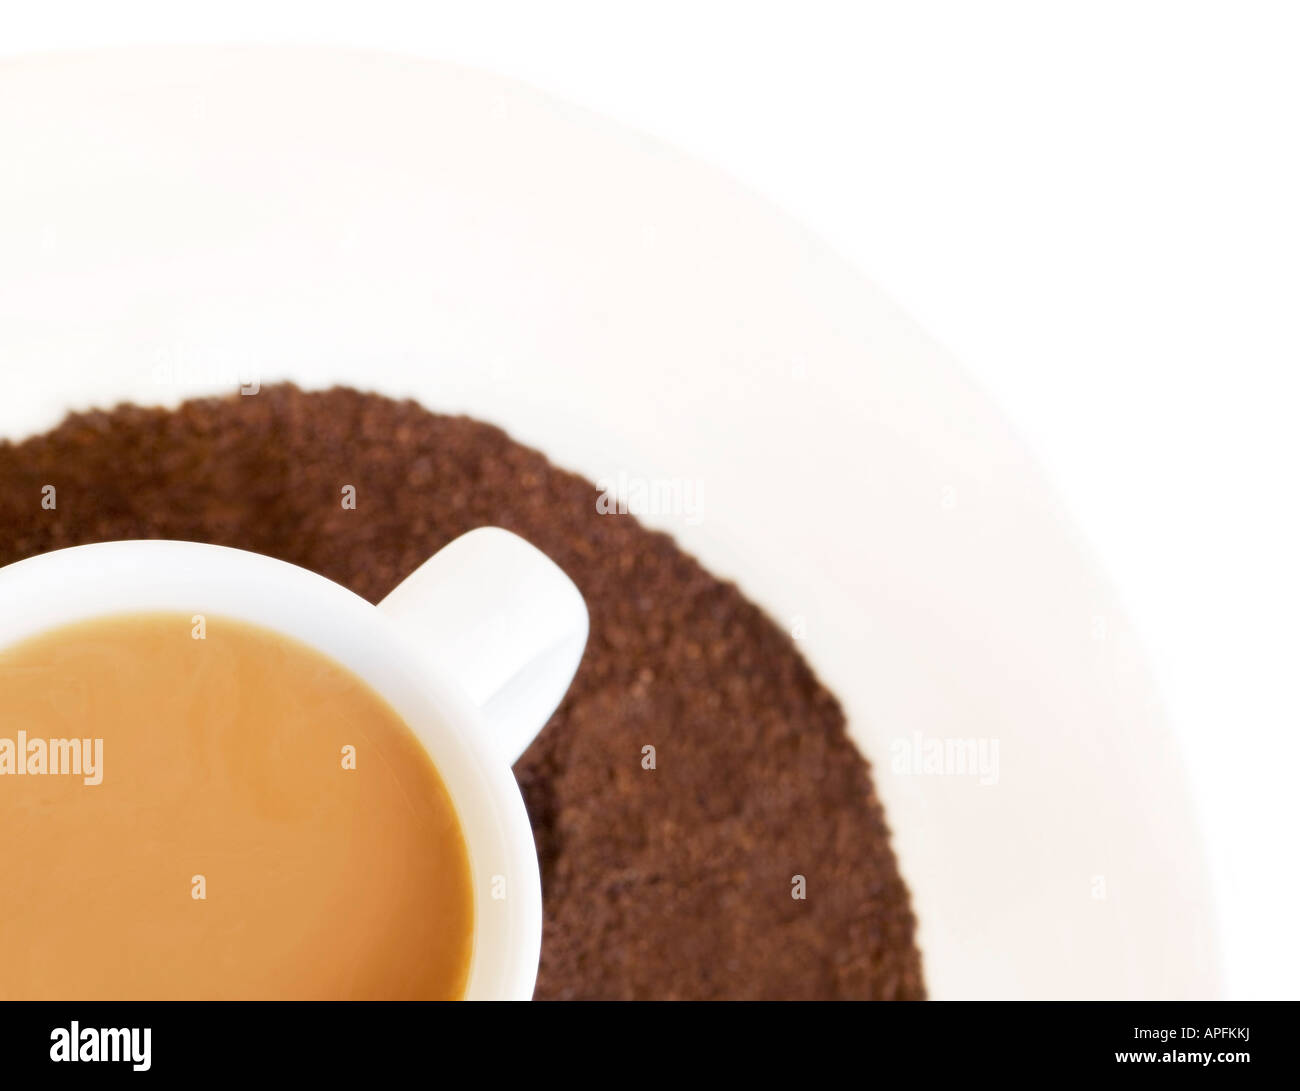 Cup of coffee and ground coffee Stock Photo